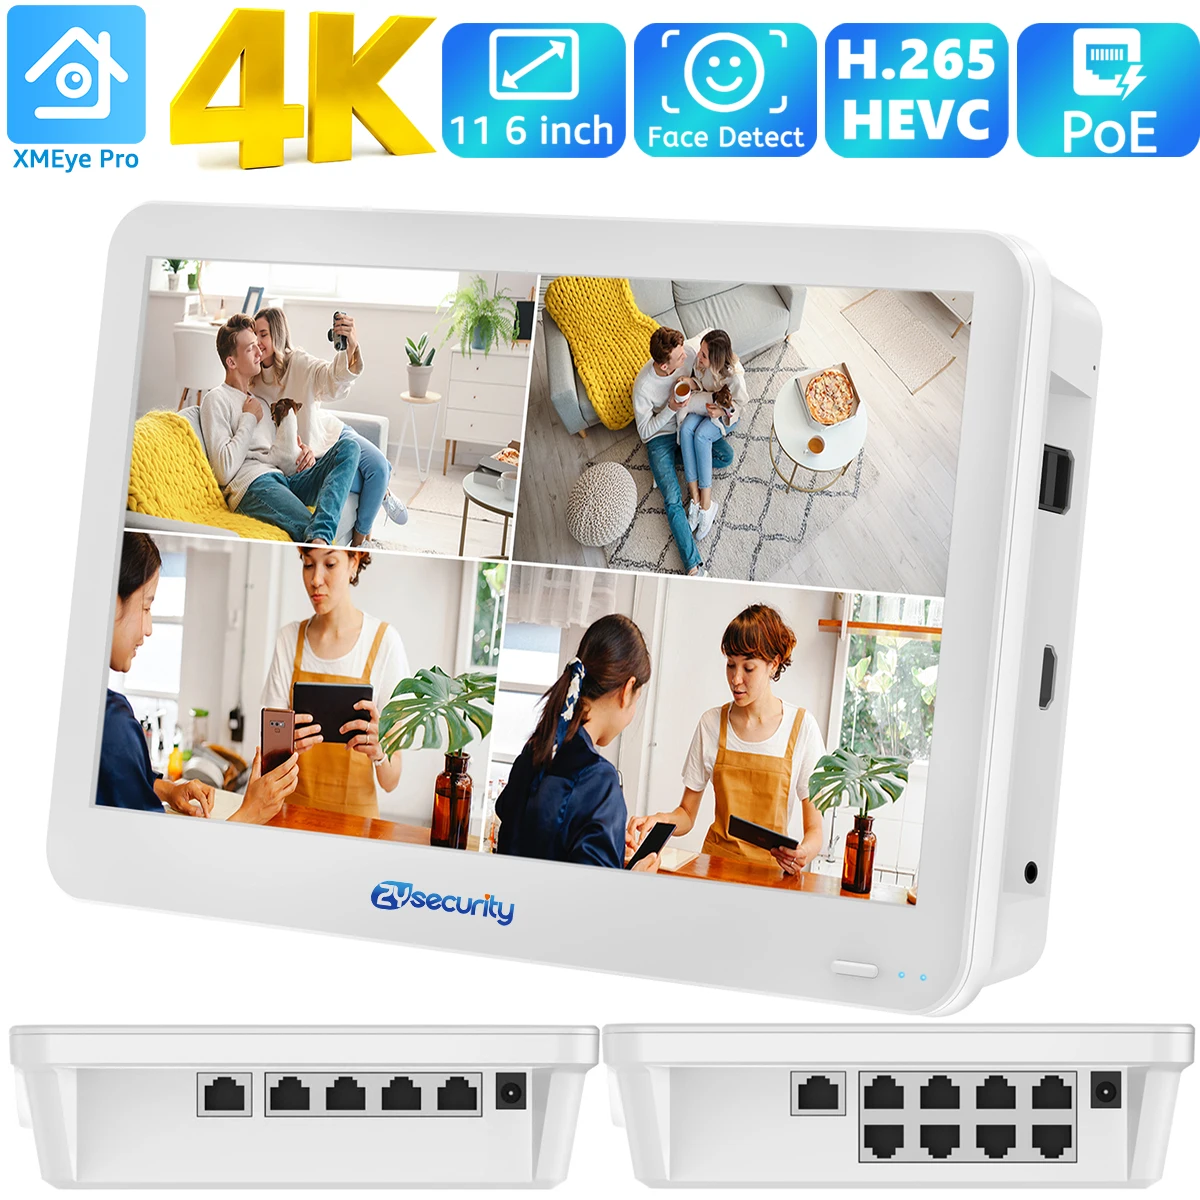 

11.6"inch Display PoE NVR 4CH 8CH Video Recorder for Home Security CCTV System 24/7 Record H.265 ONVIF Face/Vehicle Detect XMEye